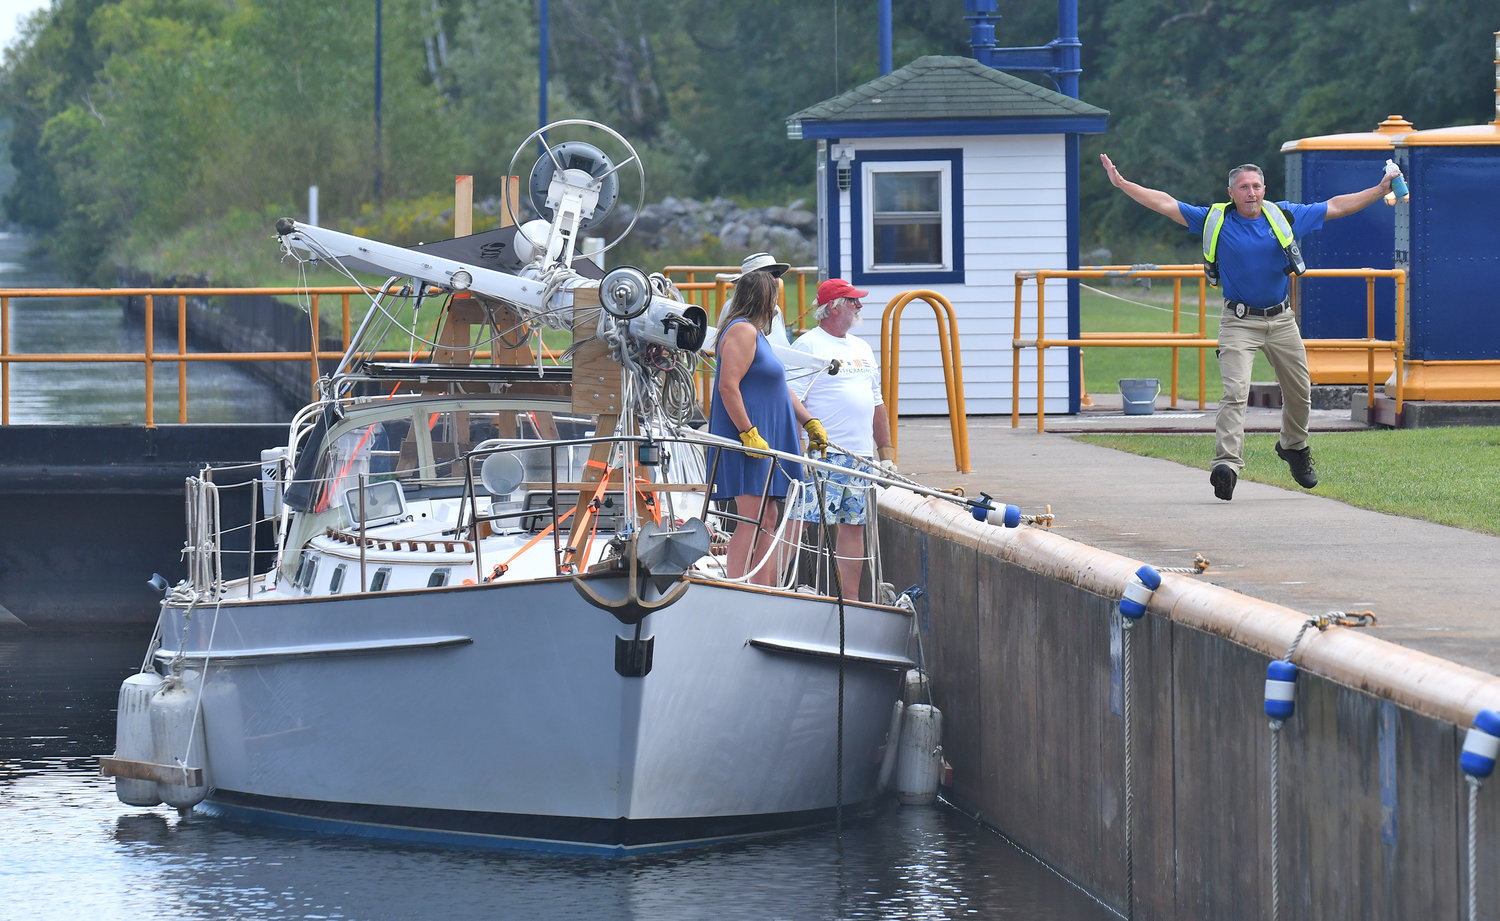 Daniel Vilovchik, Lockmaster of Lock 21 in New London does a little dance for the camera as he greets passengers aboard the Moon Rise, which was heading west through the lock Monday, Aug. 29. Vilovchik, from Belarus, found the people on the boat were Ukrainian and headed from their home in Maryland to Toronto, Canada. While few folks will be traveling by boat for Labor Day weekend, millions will be heading out one last time before fall by car or airplane.